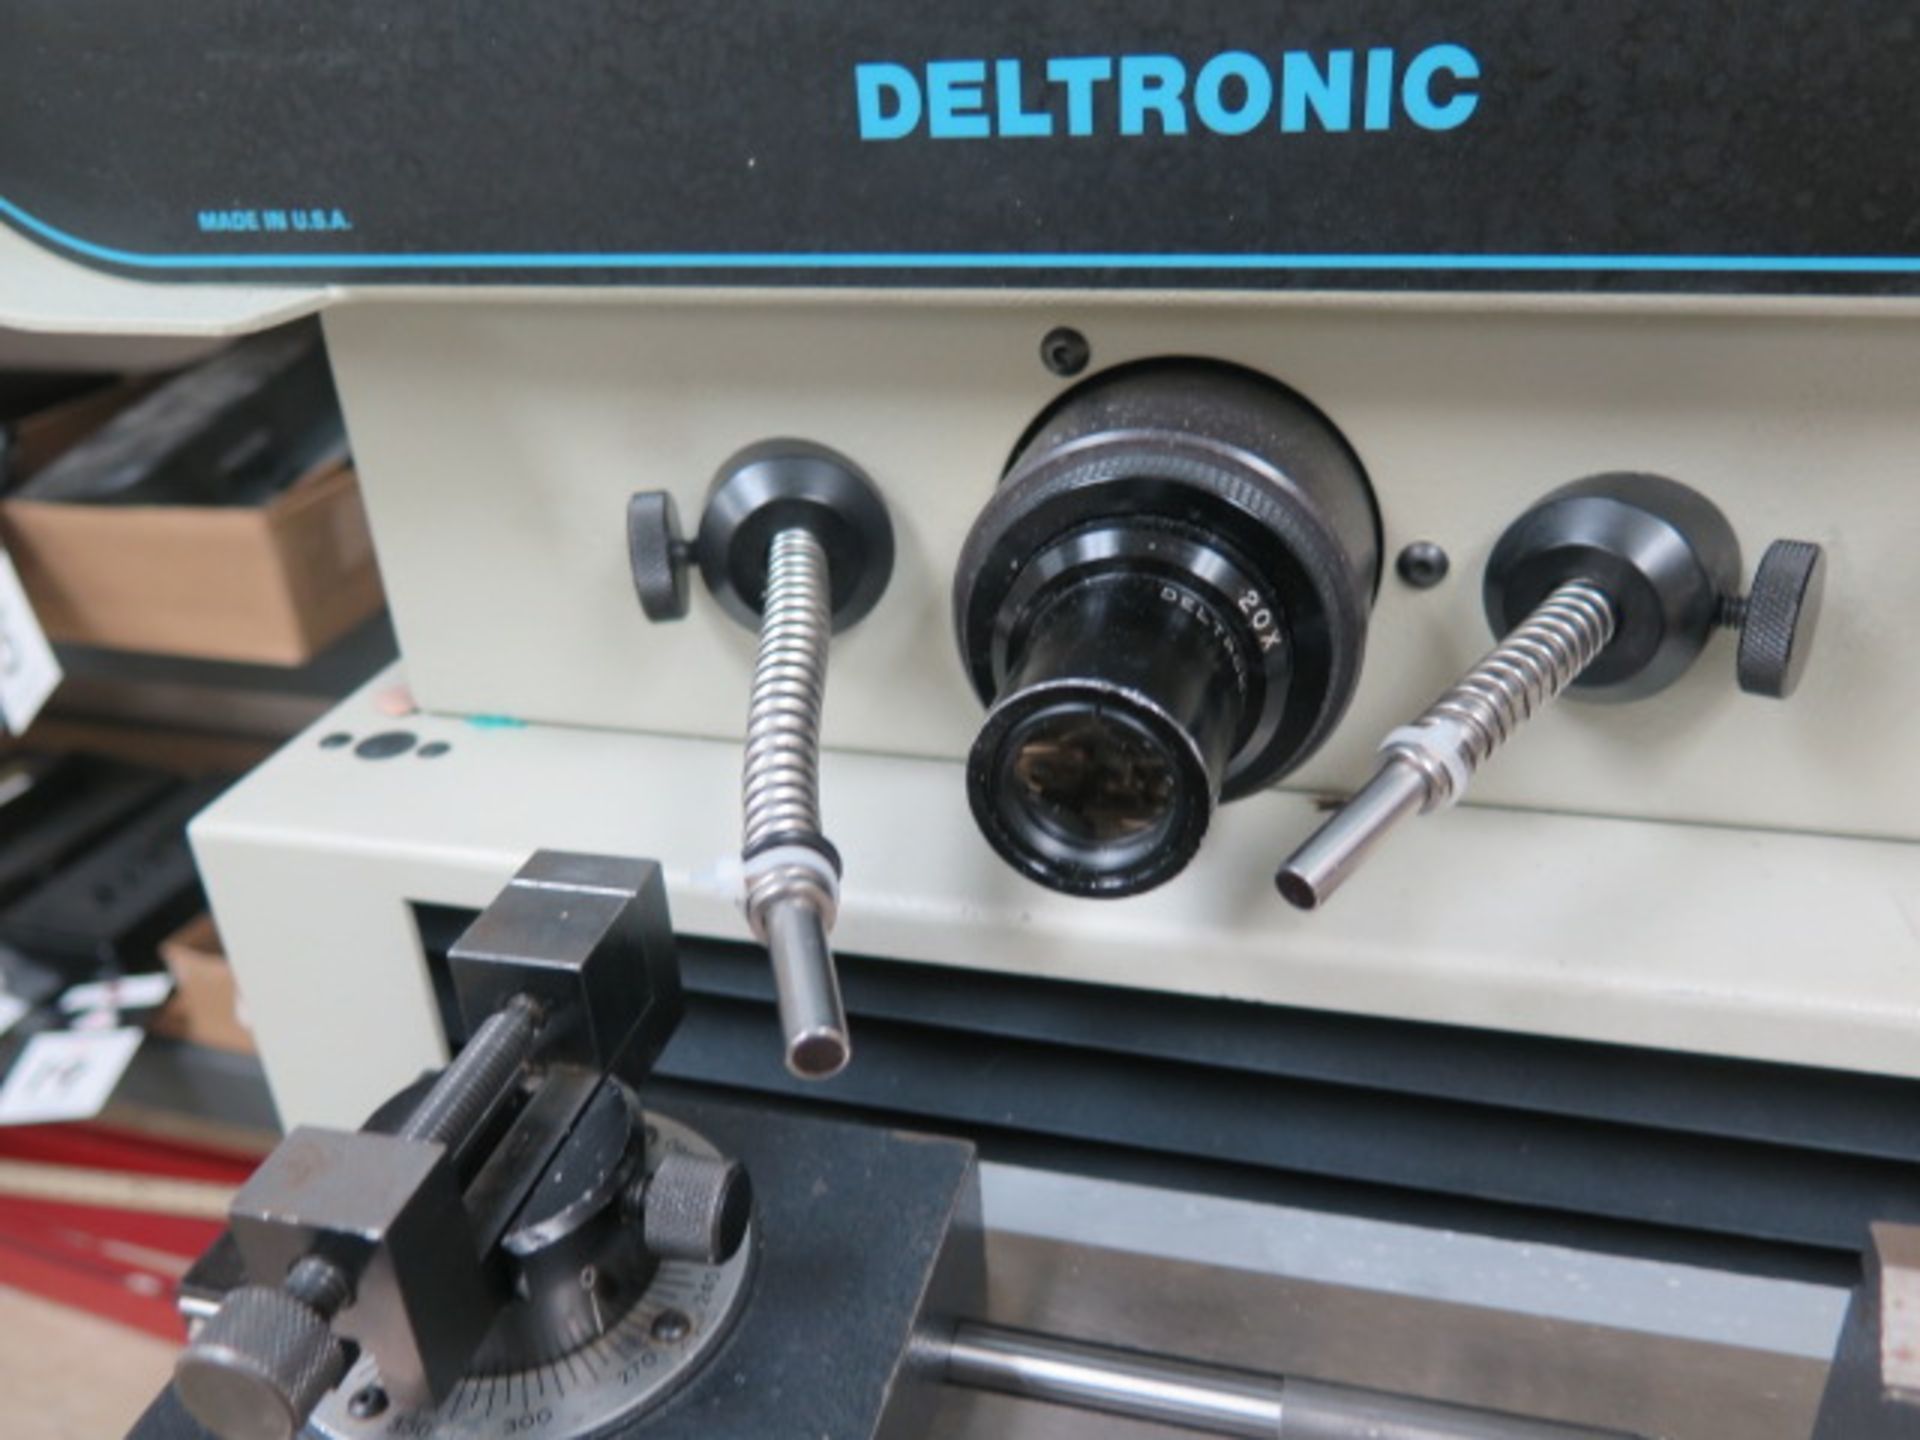 Deltronic DH214-MPC5E 14” Optical Comparator s/n 259074202 w/Deltronic MPC-5 Programmable SOLD AS IS - Image 6 of 12